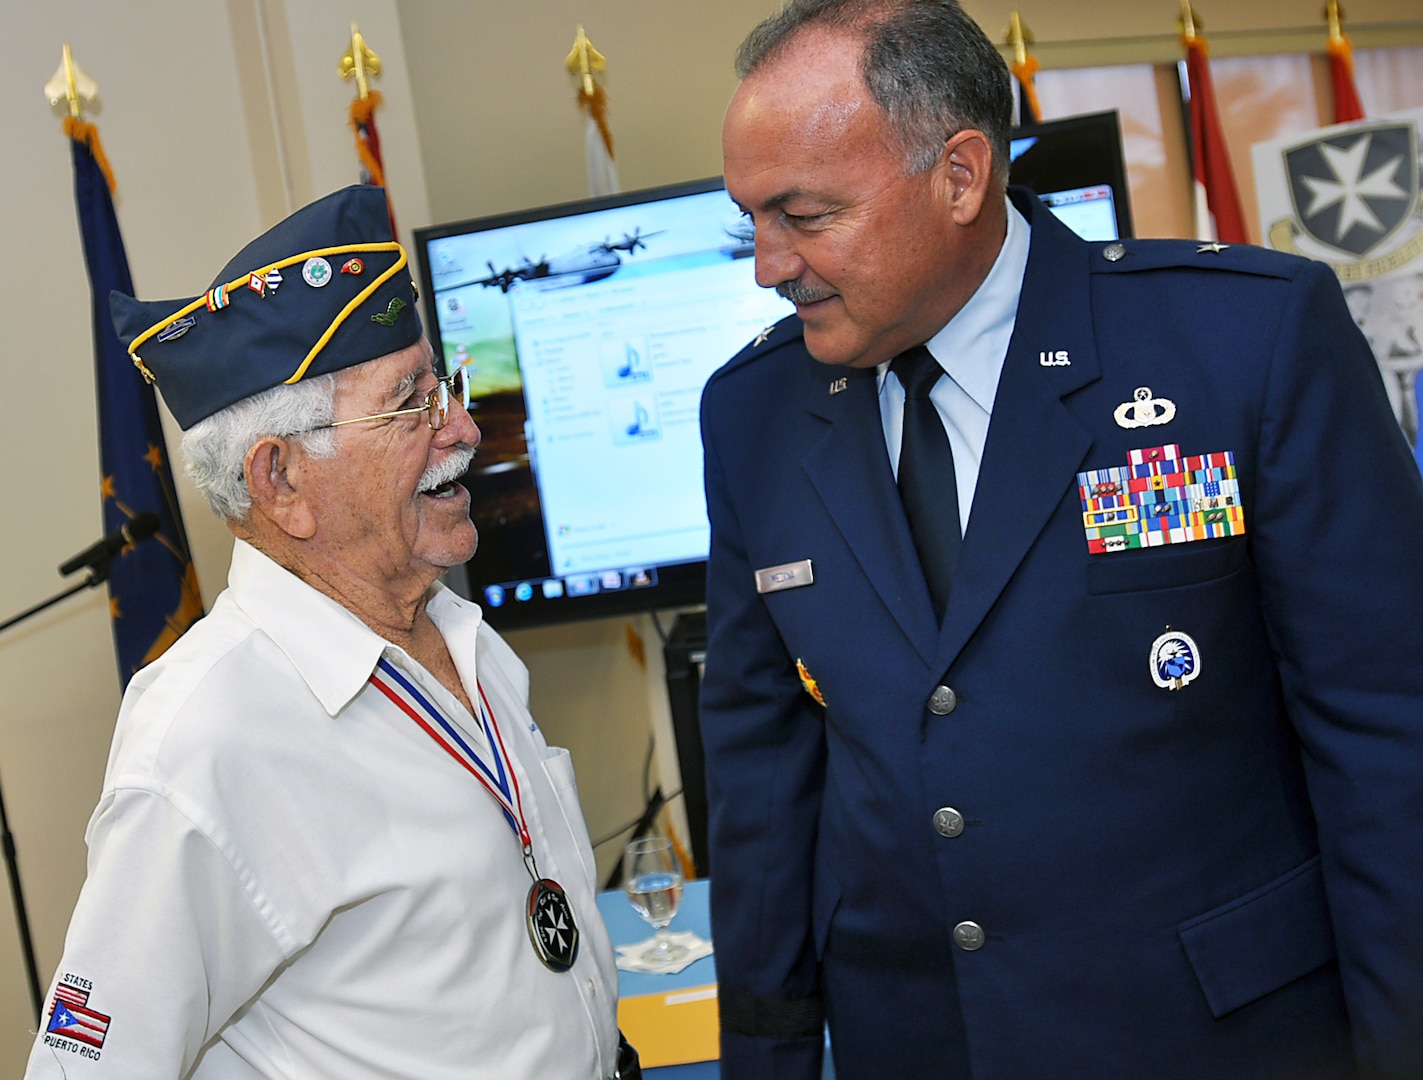 The adjutant general of Puerto Rico, Brig. Gen. Juan J. Medina Lamela, listens to the personal story of a veteran Borinqueneer after the roundtable The Borinqueneers: Then and Now: The Evolution of the 65th Infantry Regiment, in San Juan.